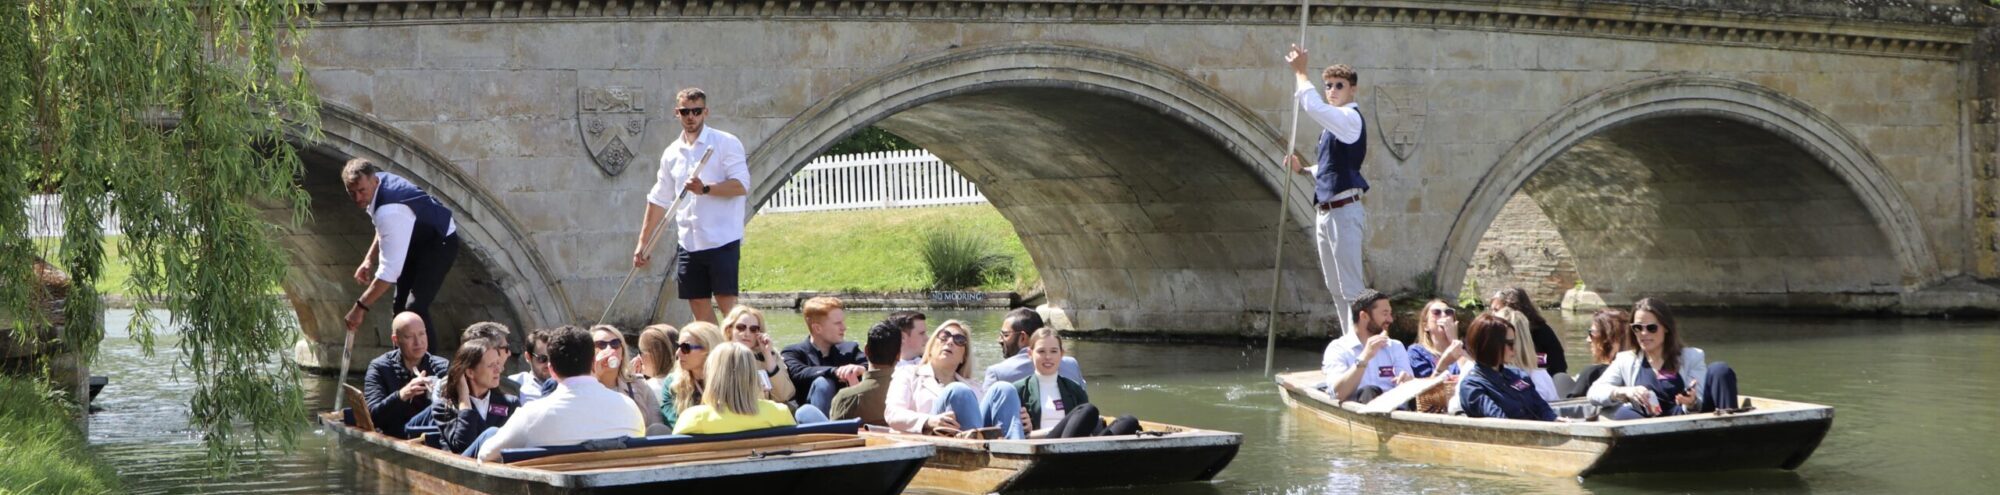 Mother’s Day Punting